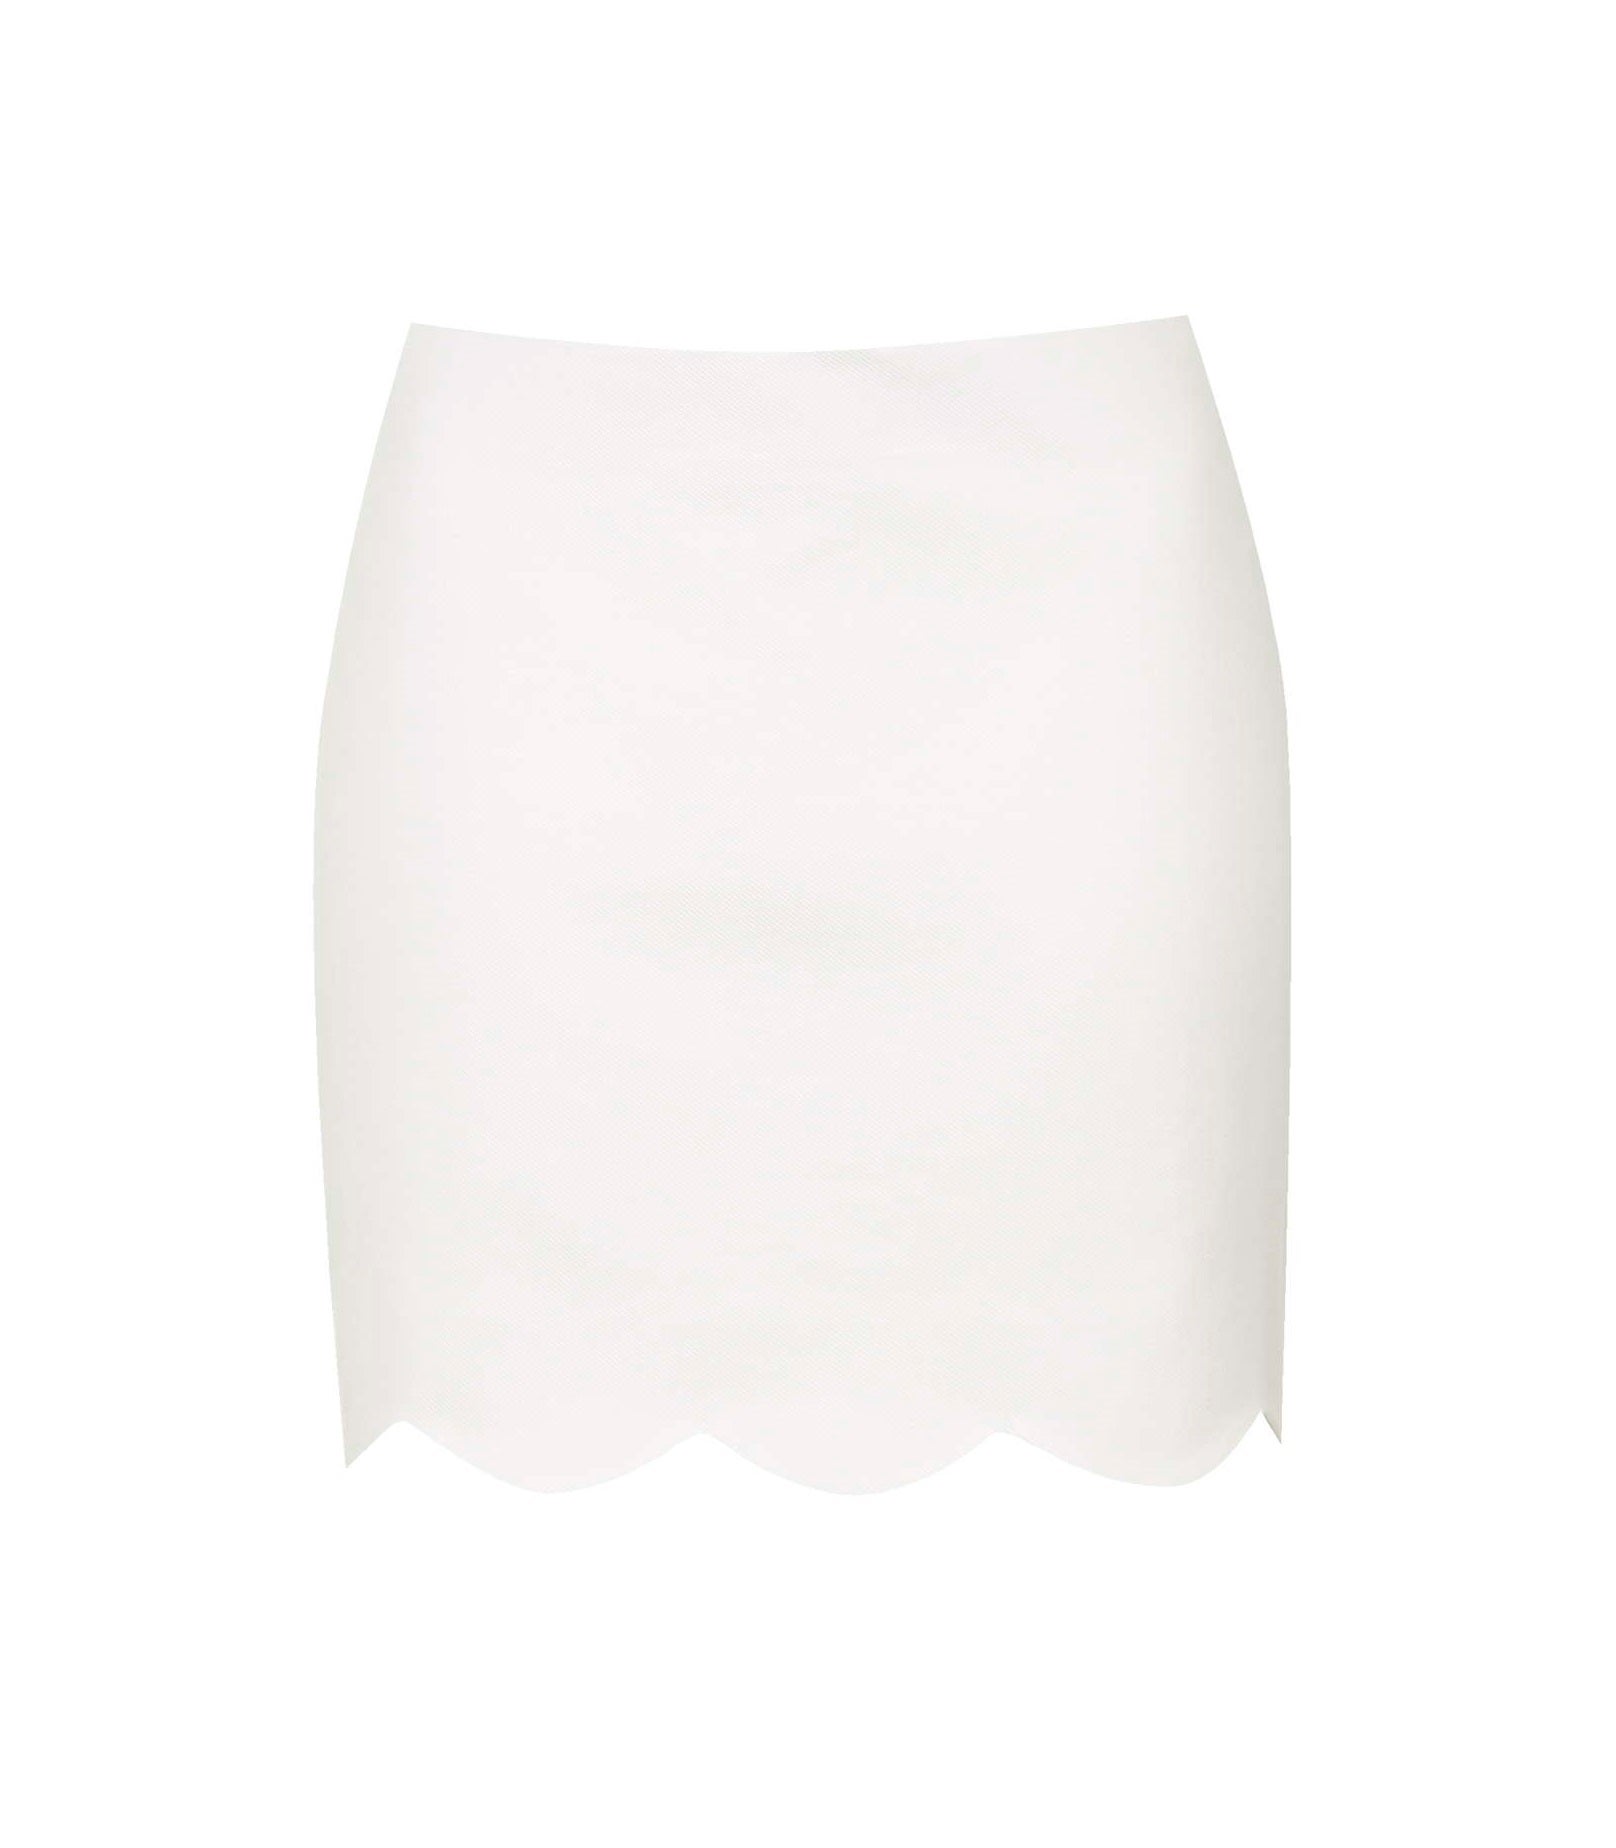 30 Skirts That Would Make a Perfect Addition to Your Summer Ensemble